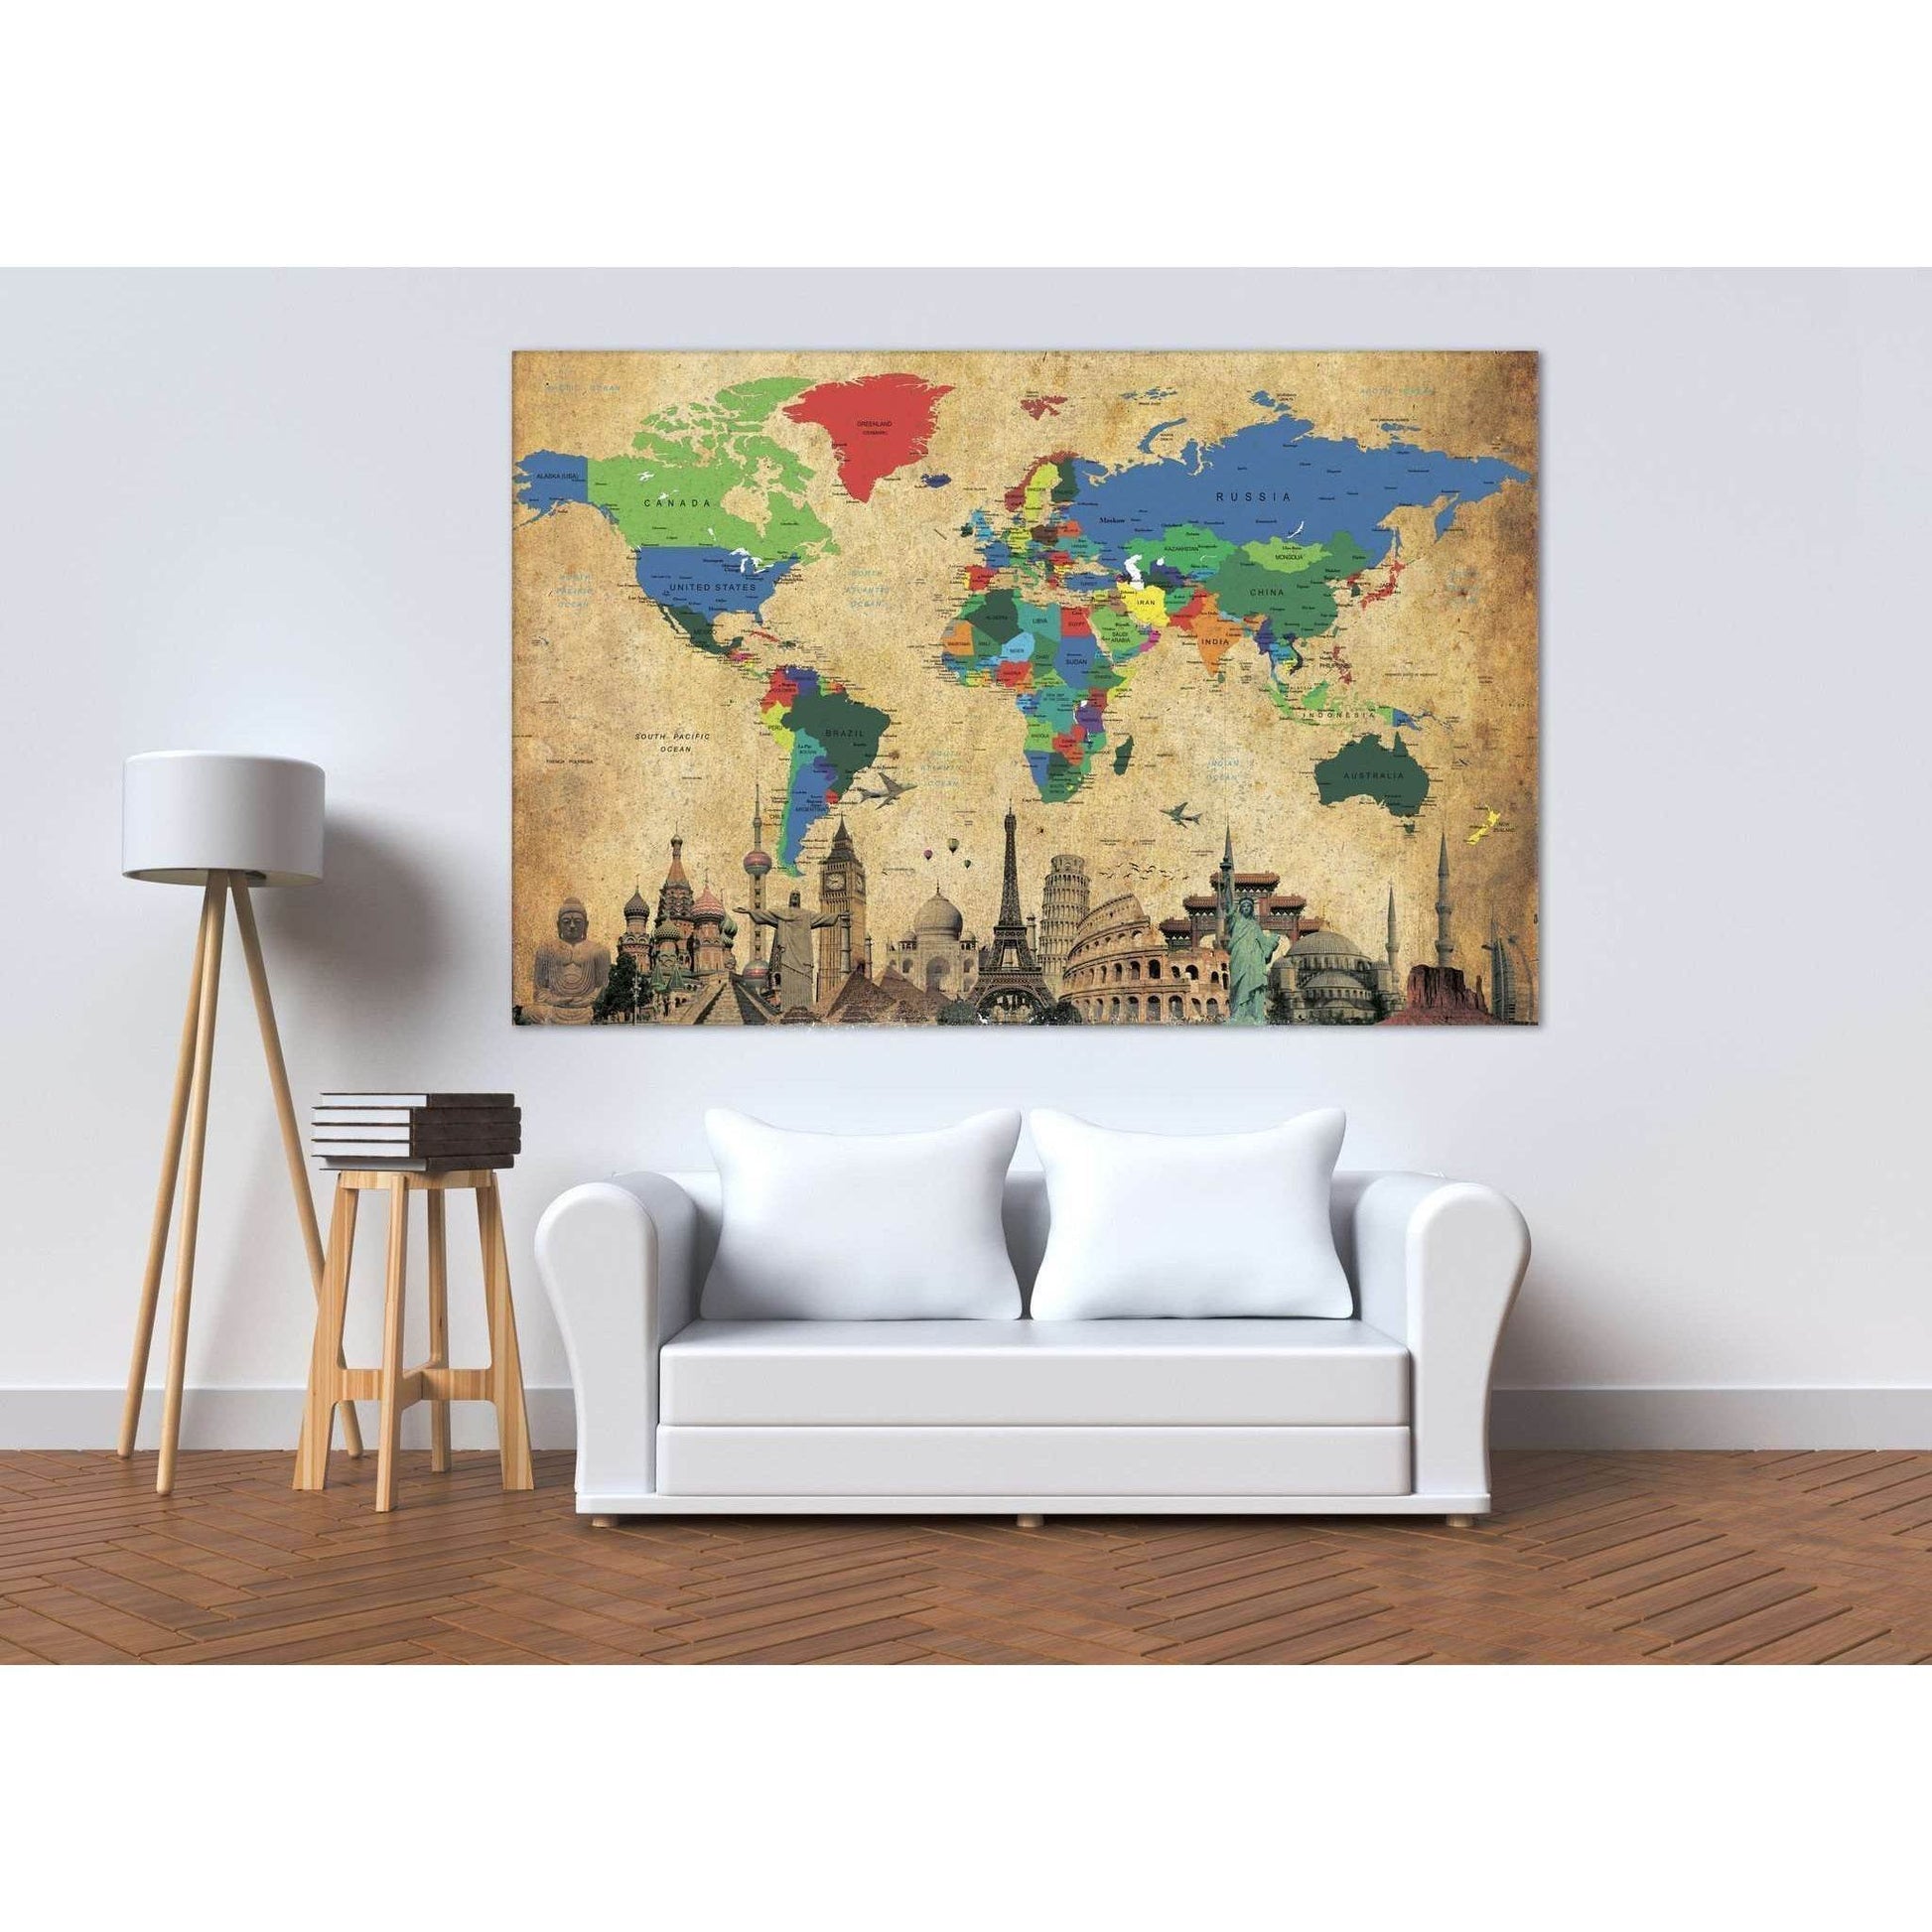 Brown World Map with Landmarks Canvas PrintDecorate your walls with a stunning Map with Landmarks Canvas Art Print from the world's largest art gallery. Choose from thousands of World Map artworks with various sizing options. Choose your perfect art print